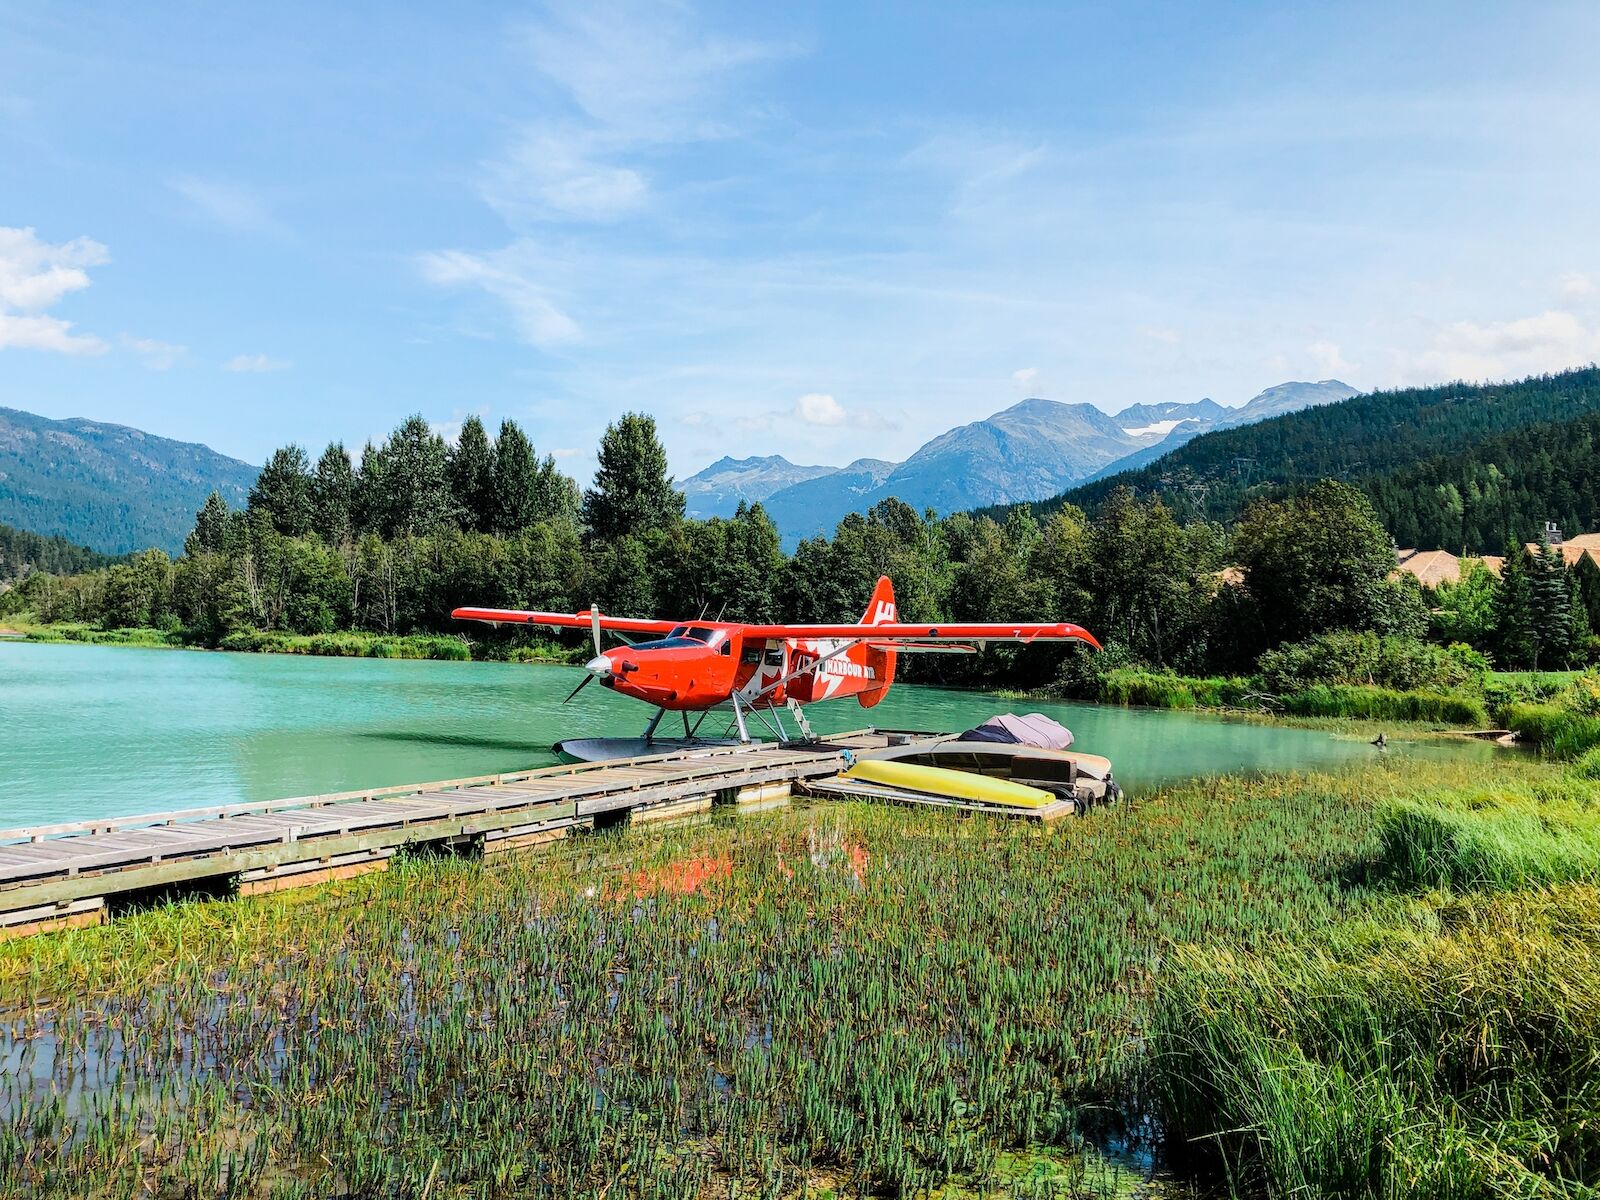 Float plane on Green Lake in Whistler, Canada